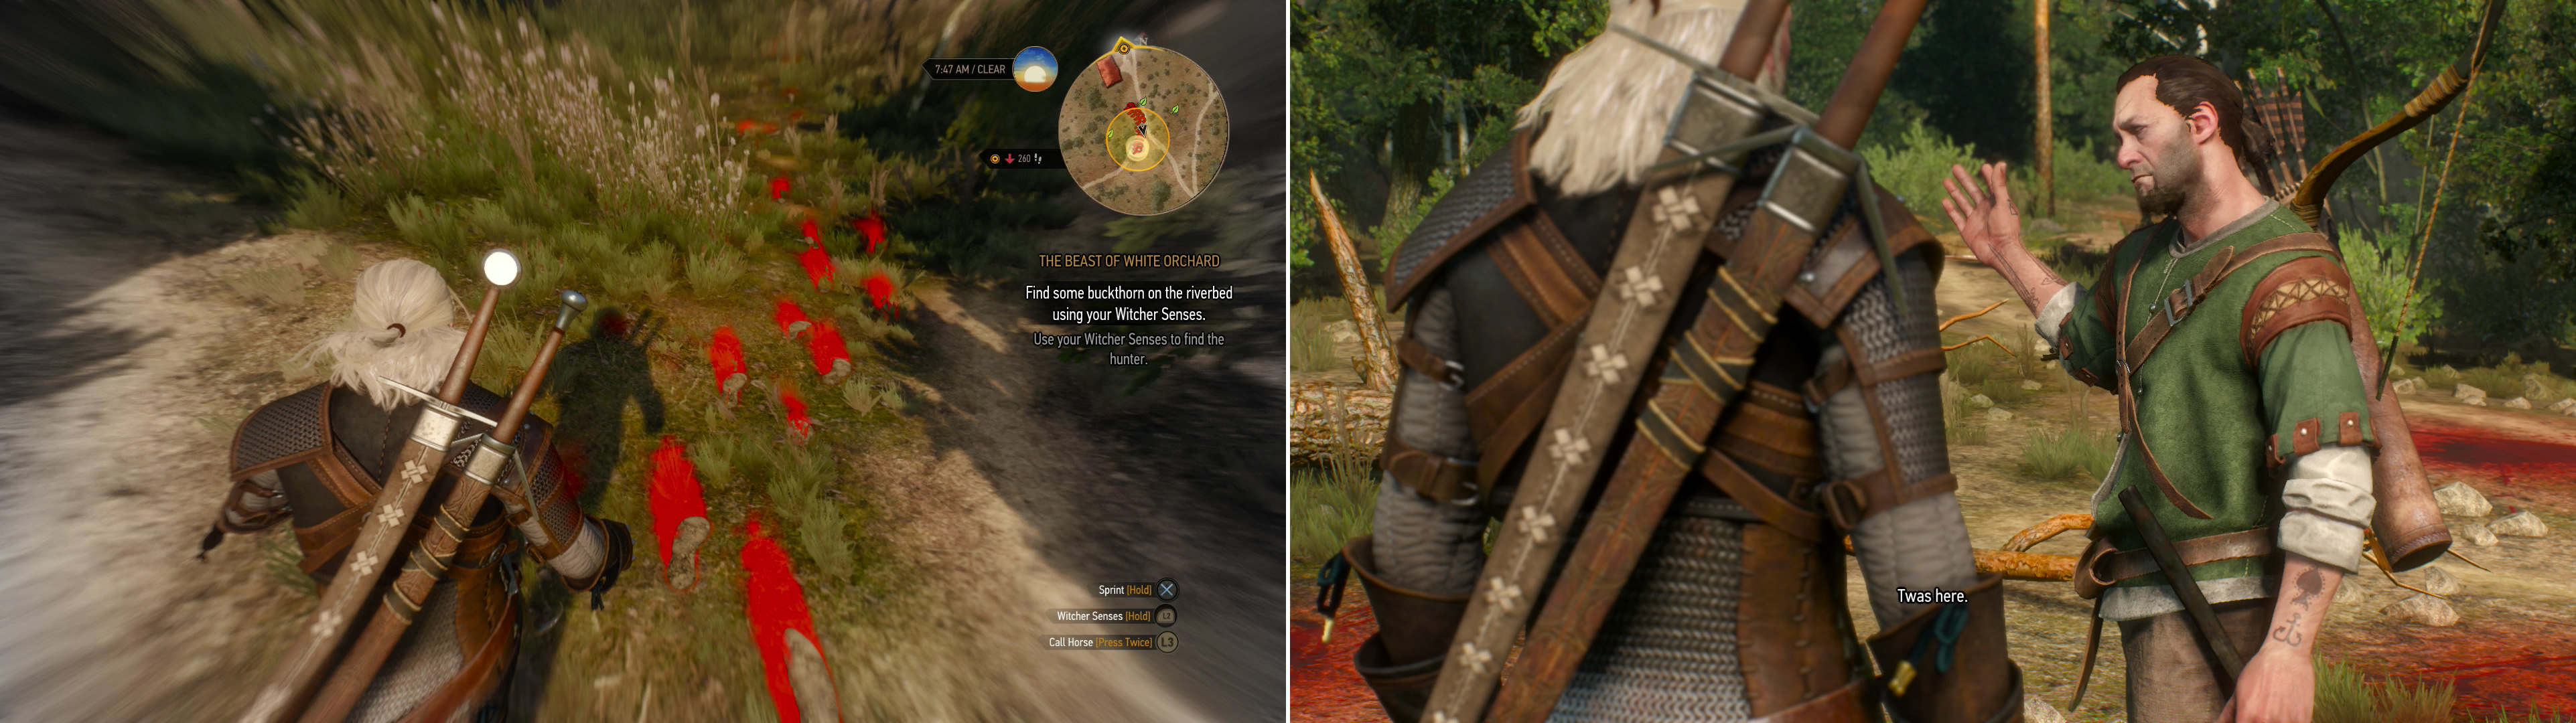 Track Mislave down (left) and get him to lead you to where the Griffin attack the Nilfgaardian patrol (right).